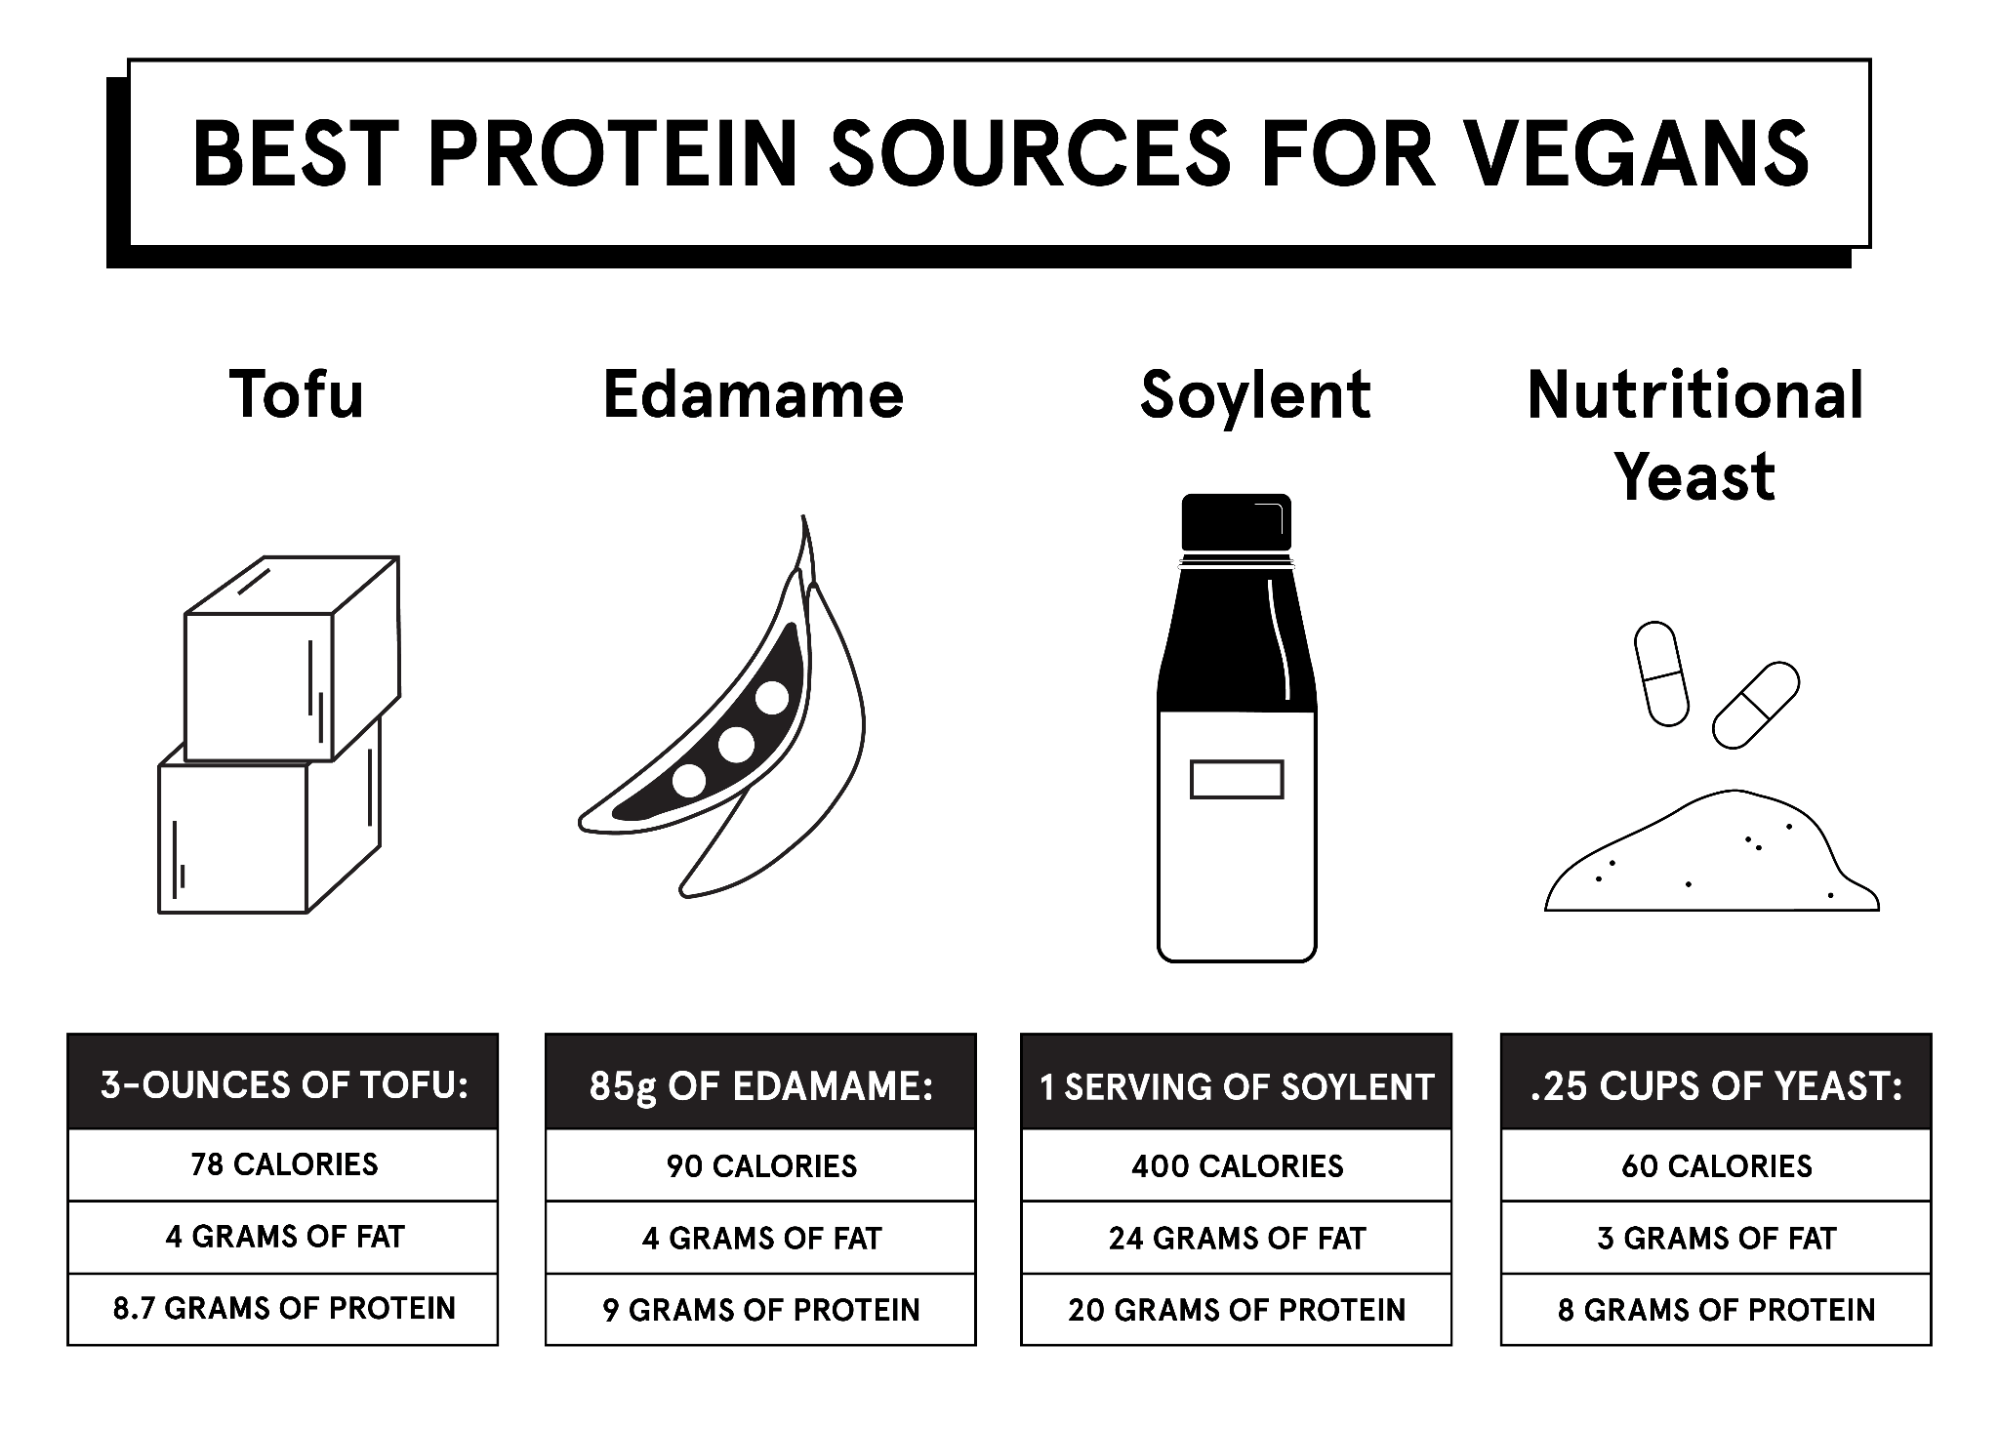 Best protein sources for vegans by Soylent